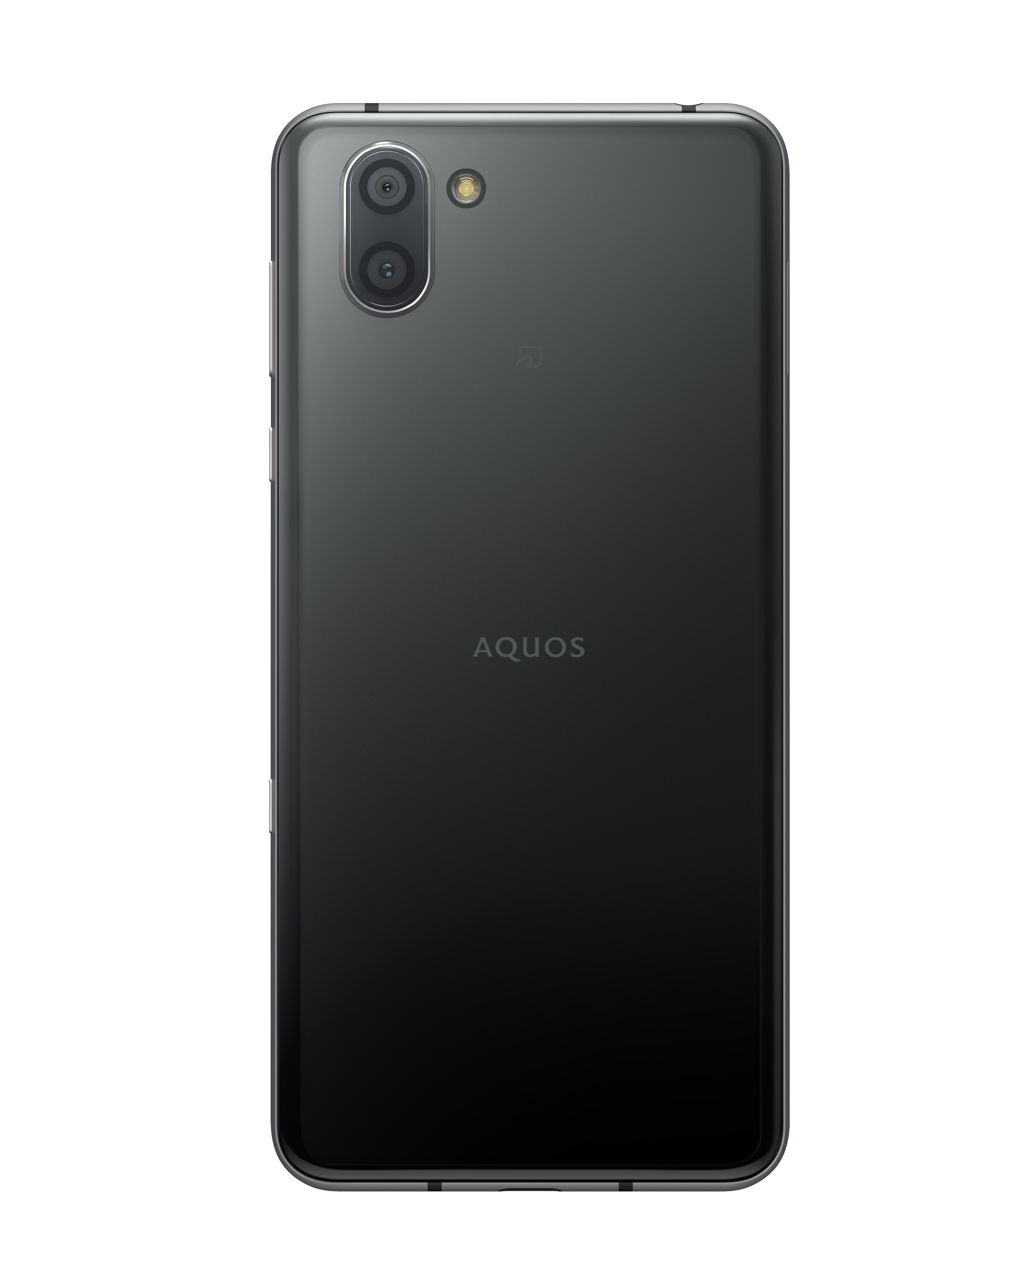 Sharp Aquos R3 - another with a double notch :: GSMchoice.com